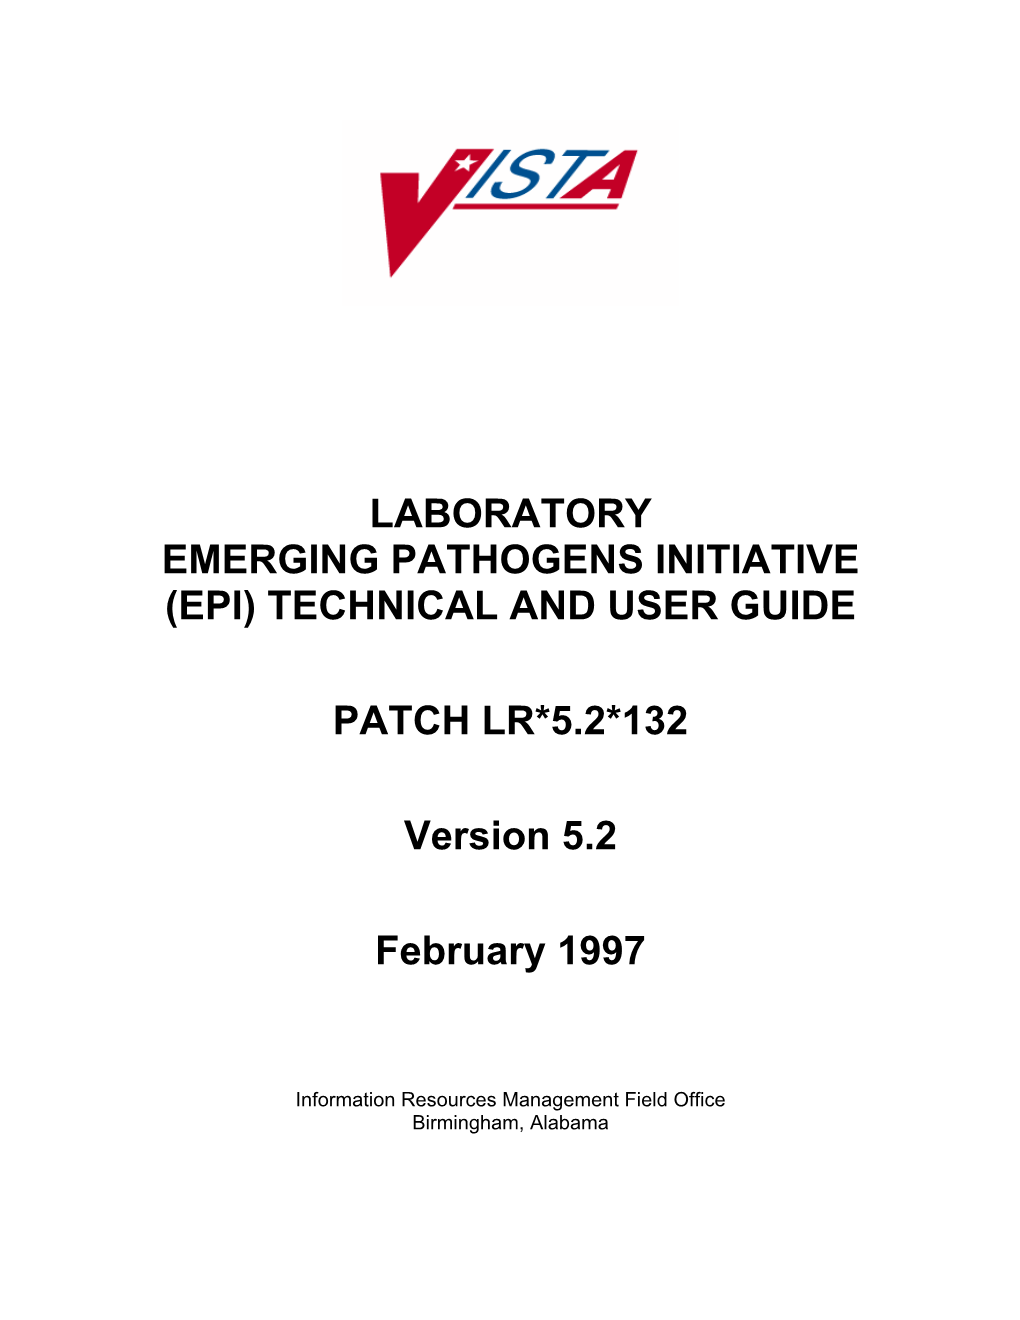 Laboratory Emerging Pathogens Initiative (Epi) Technical and User Guide